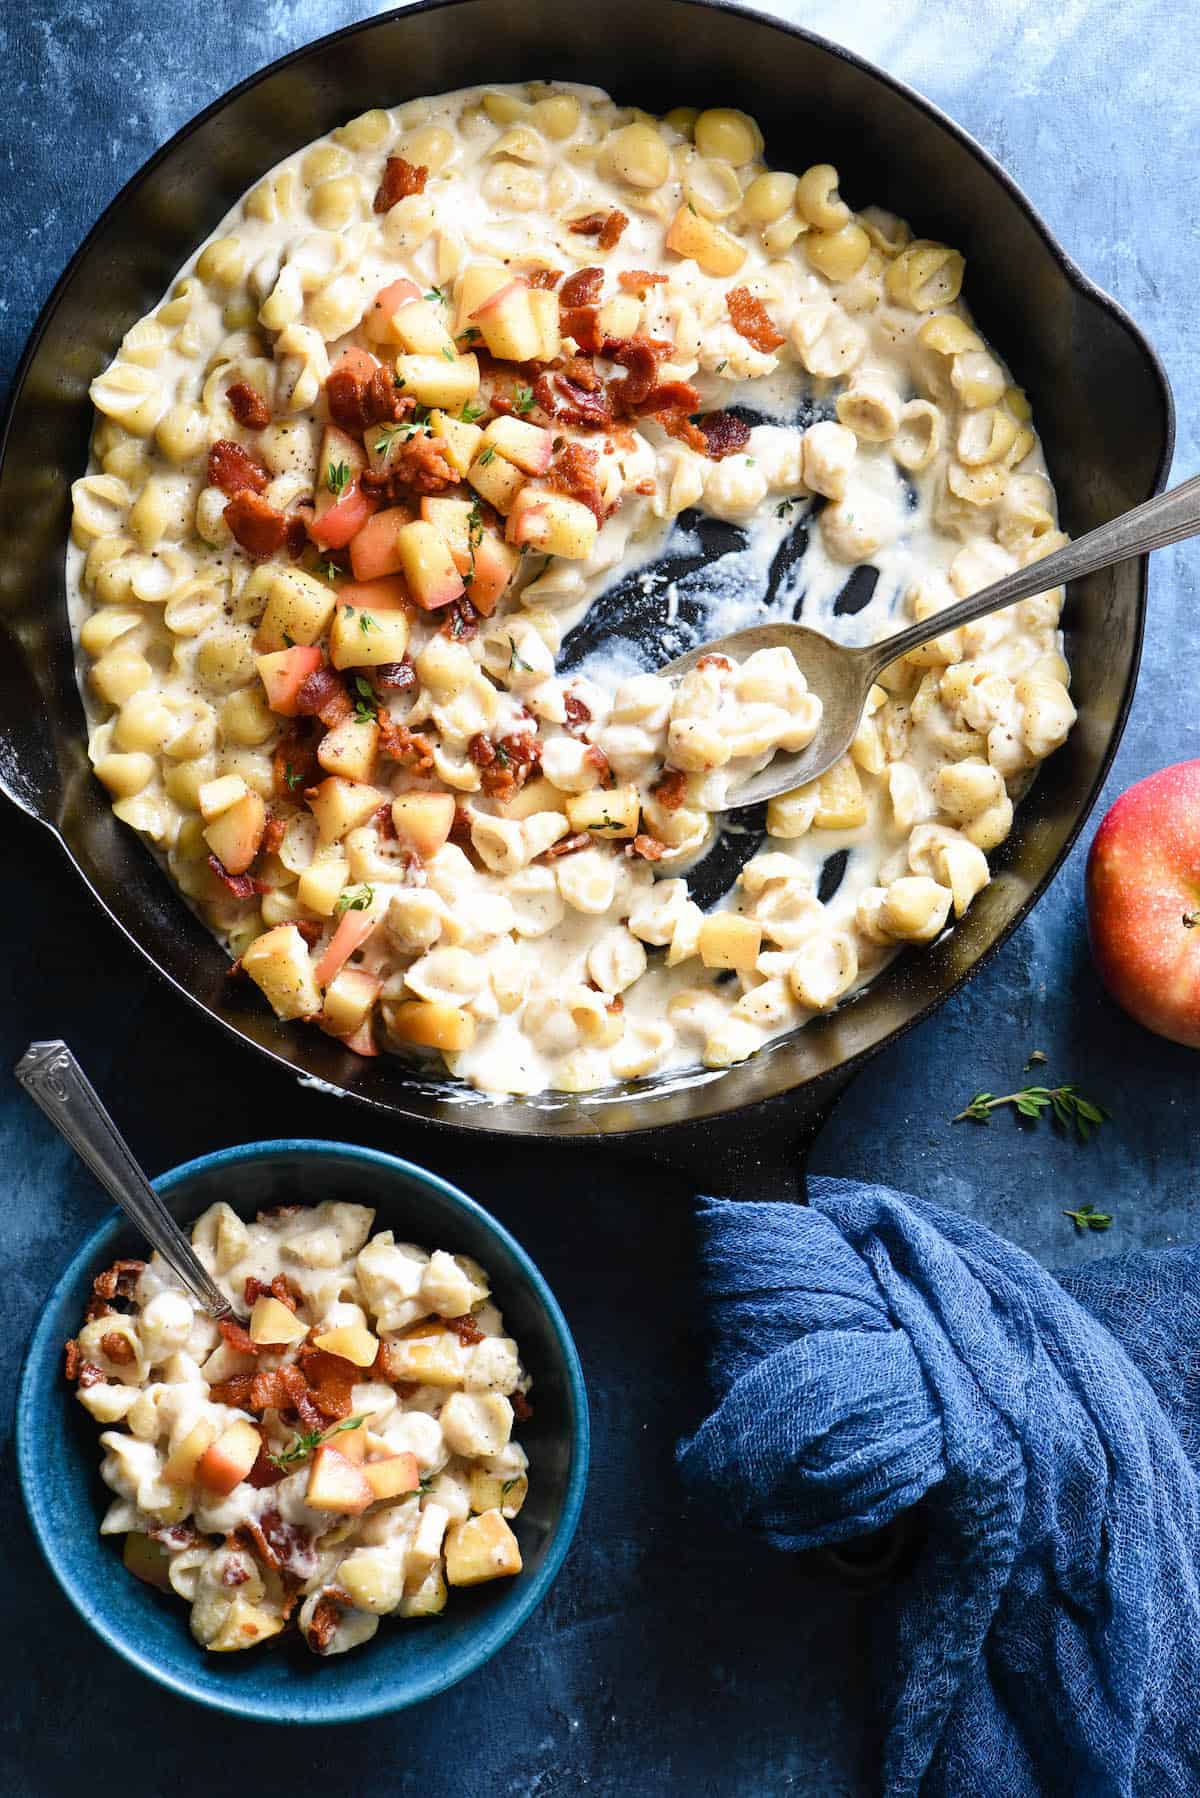 This Skillet Mac and Cheese with Bacon & Apples recipe can be made in a single skillet in 30 minutes flat. It's sure to become a weeknight favorite for the whole family! | foxeslovelemons.com